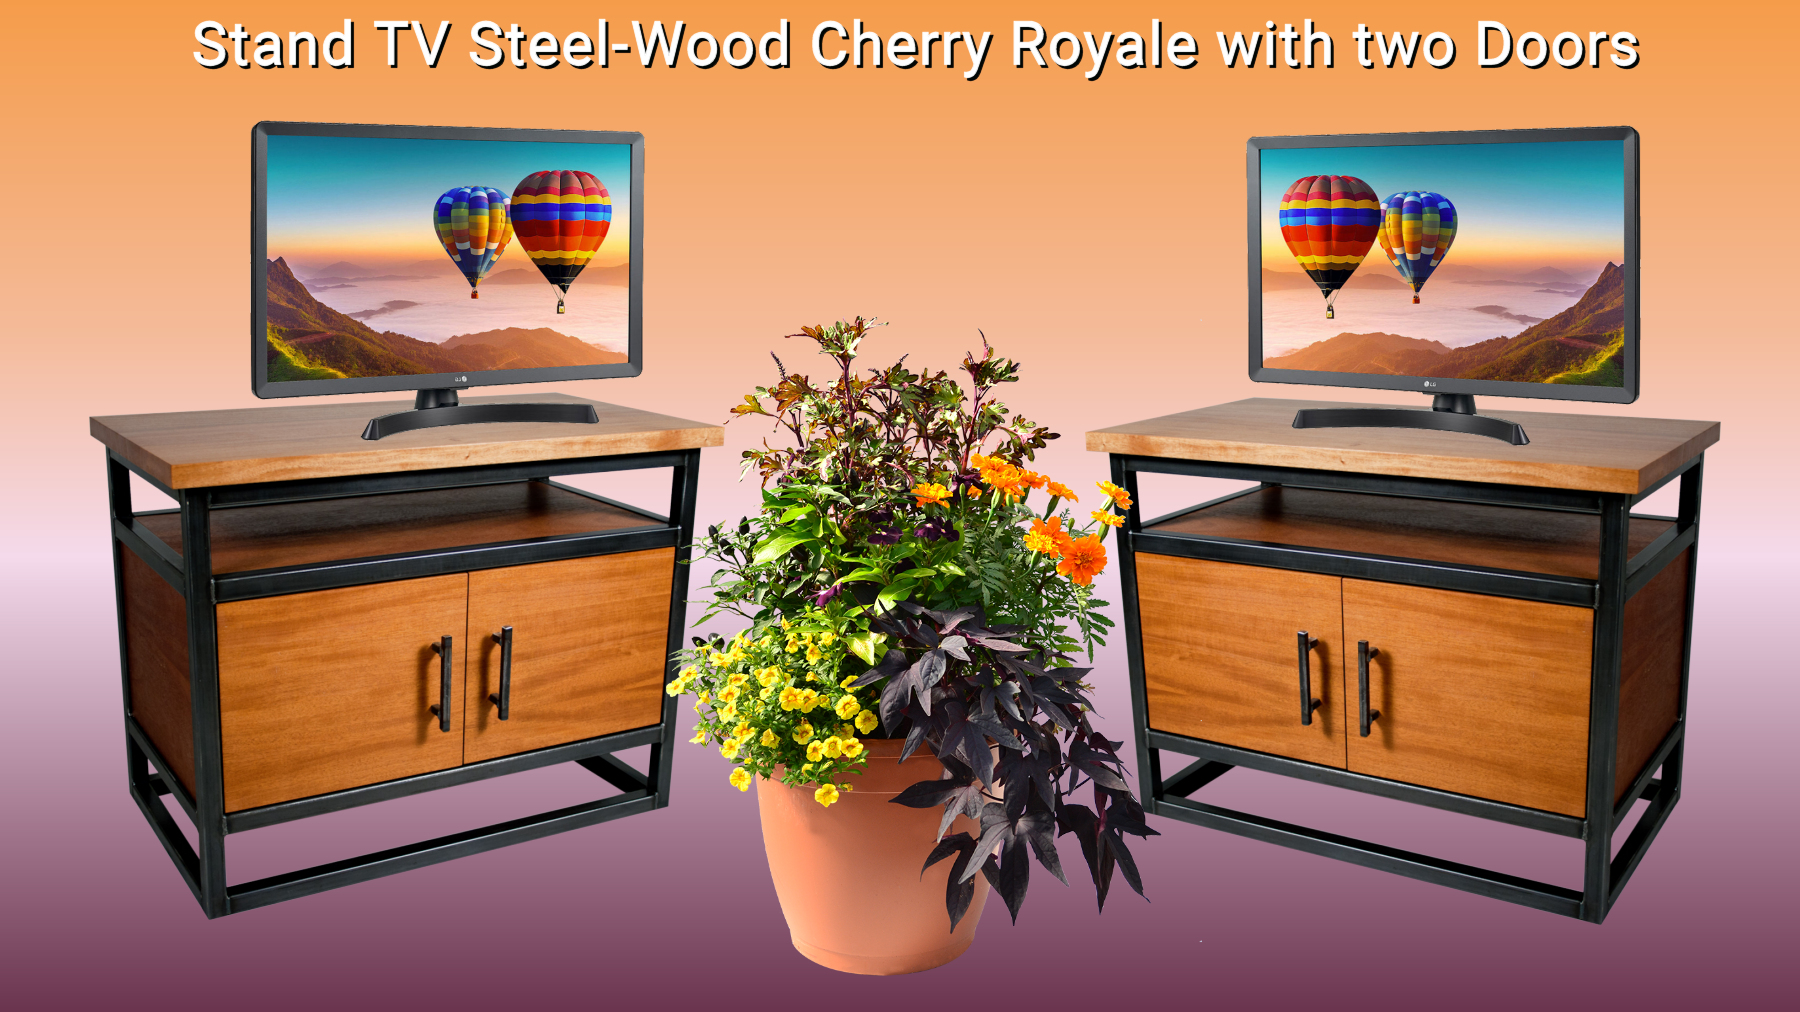 Stand TV Steel-Wood Cherry Royale with two Doors